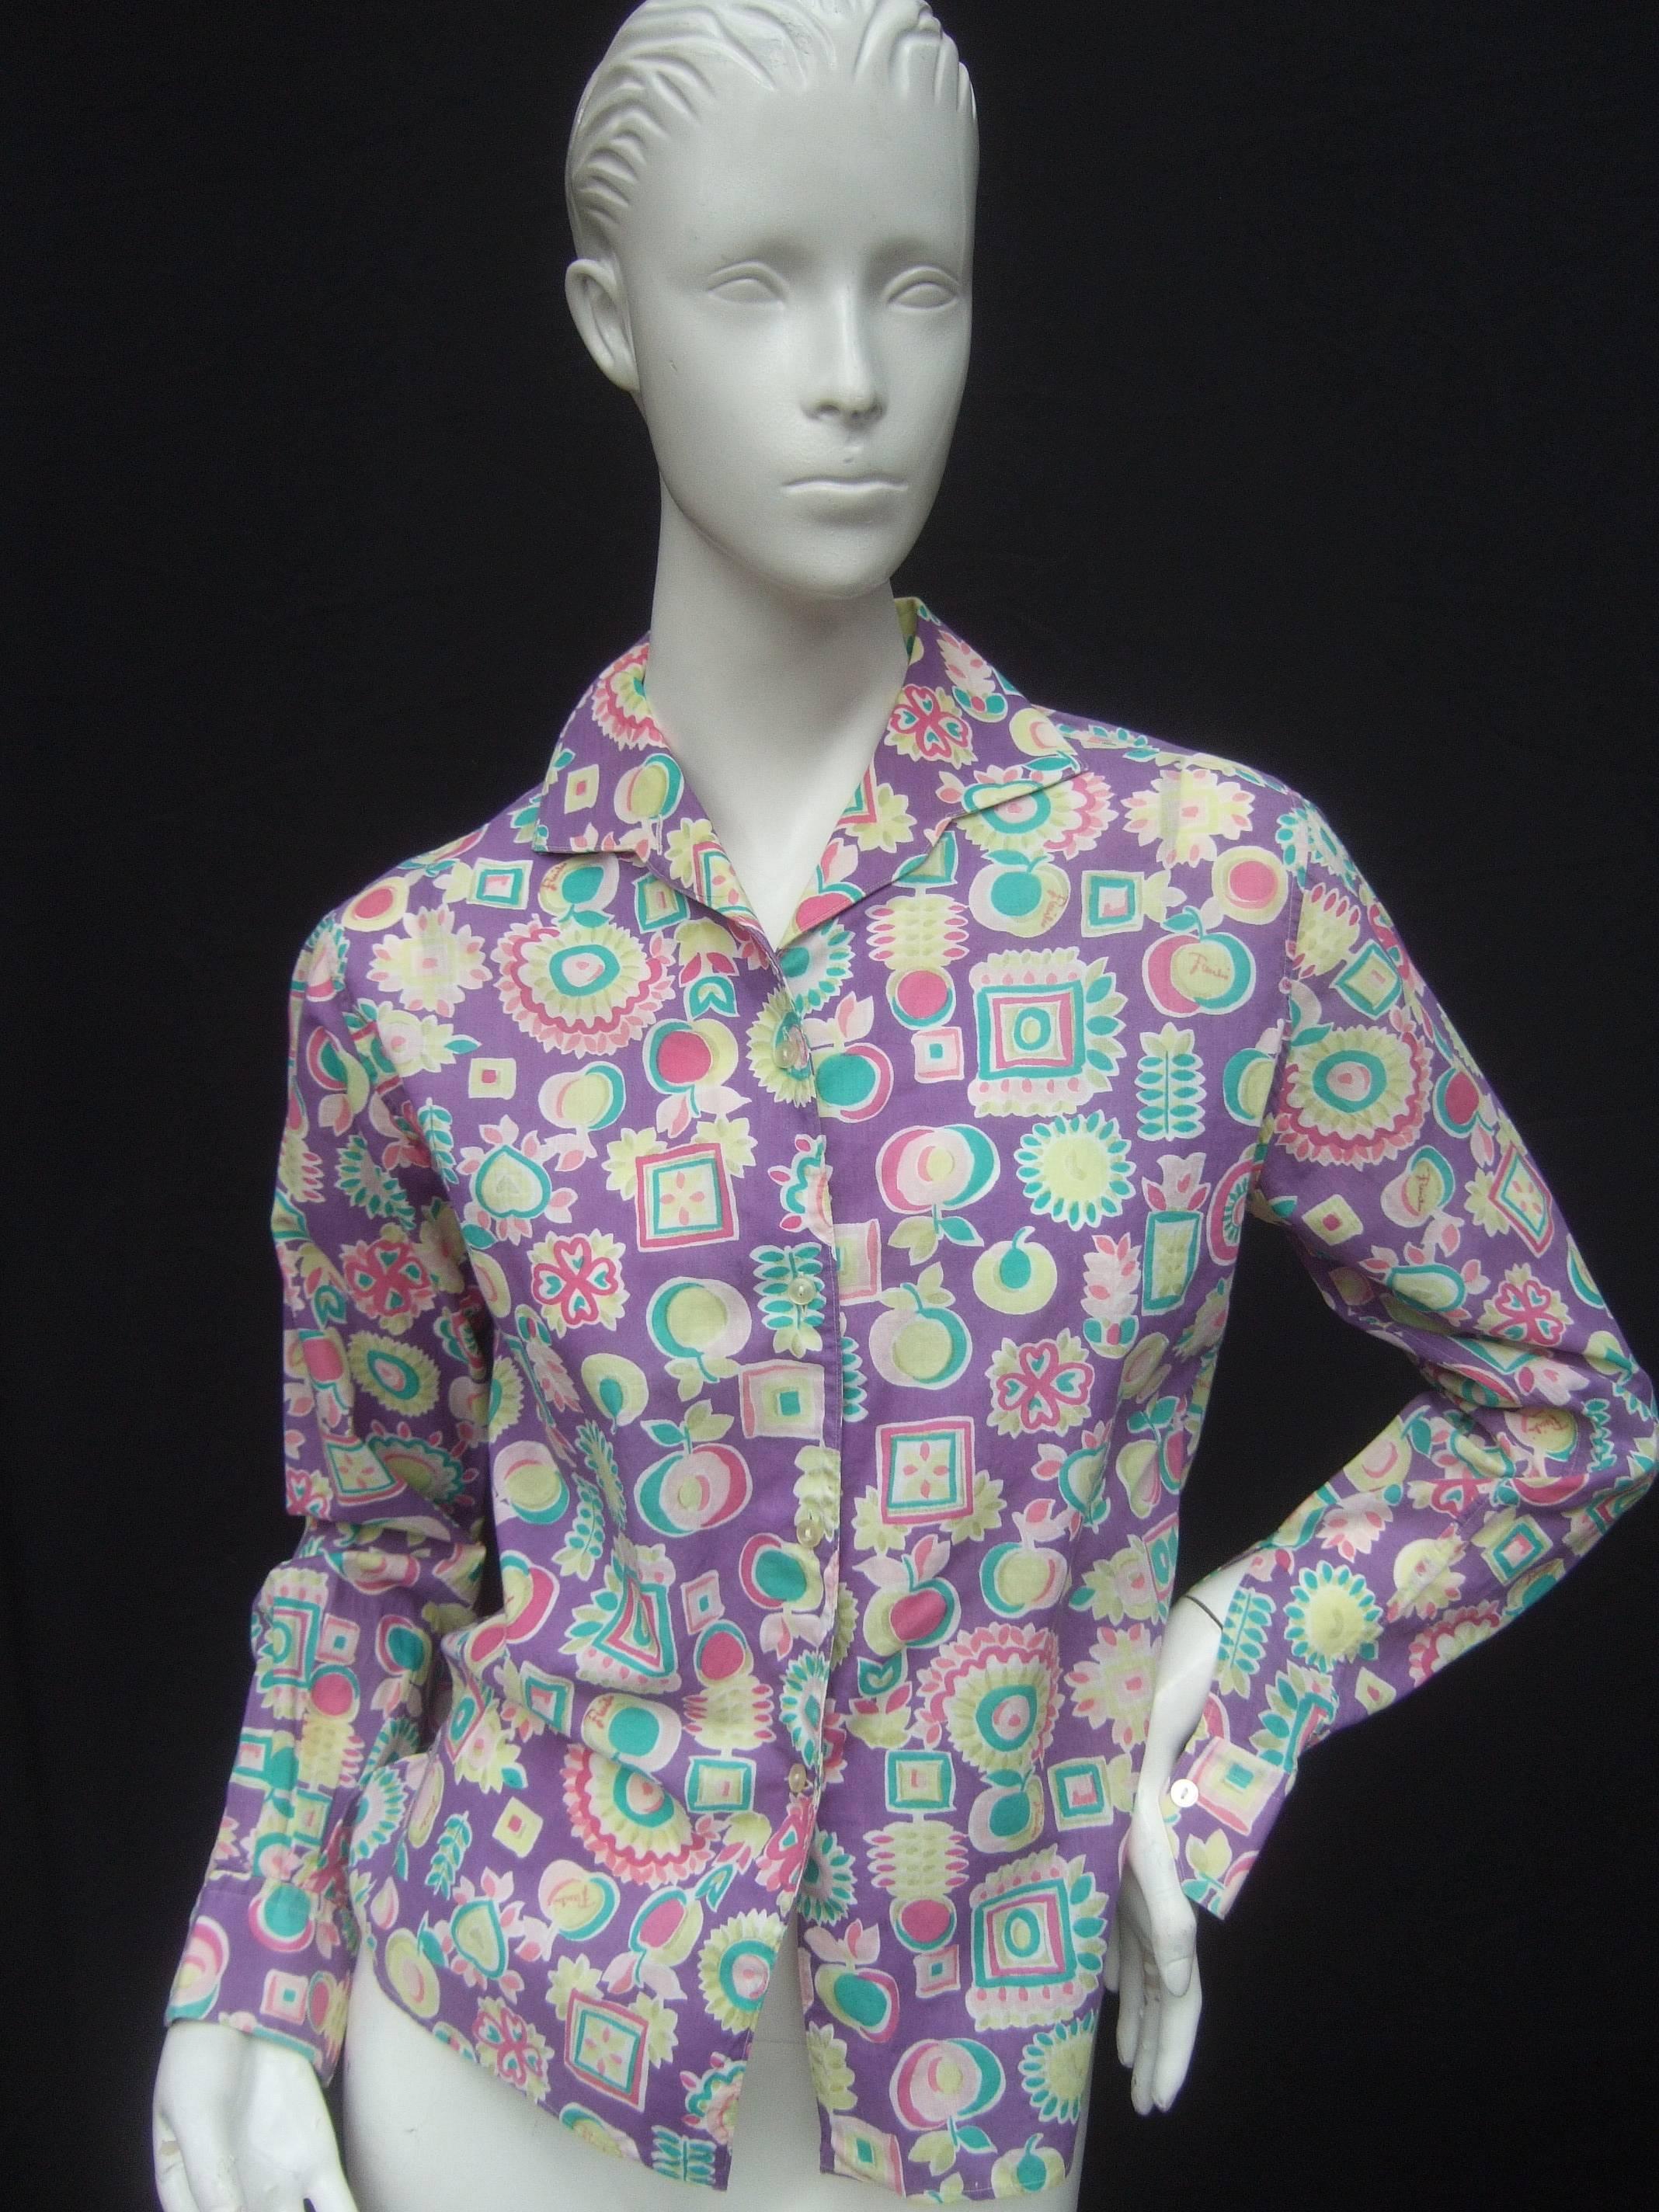 Emilio Pucci Cotton pastel print blouse Made in Italy
The charming retro blouse is designed with color
block floral and fruit graphics

The collage of fruits and flowers are set against 
a lavender purple background. Emilio's script
name is